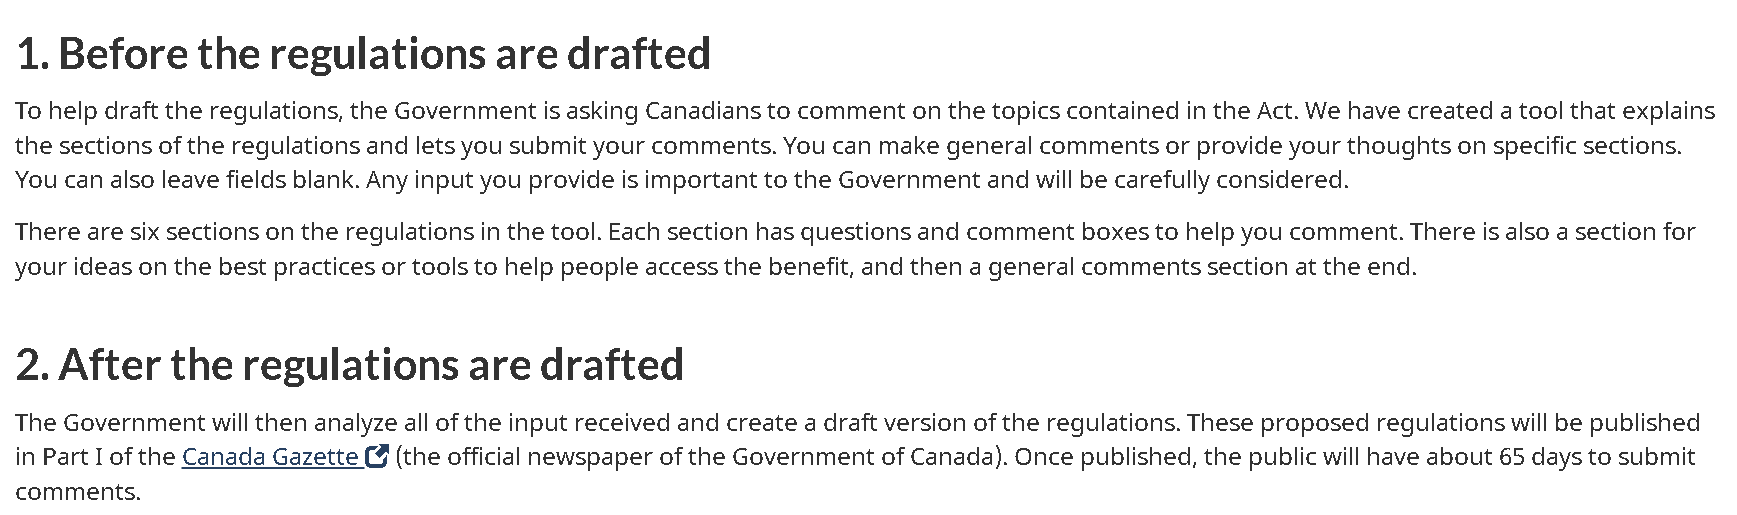 Canada Disability Benefit Tool